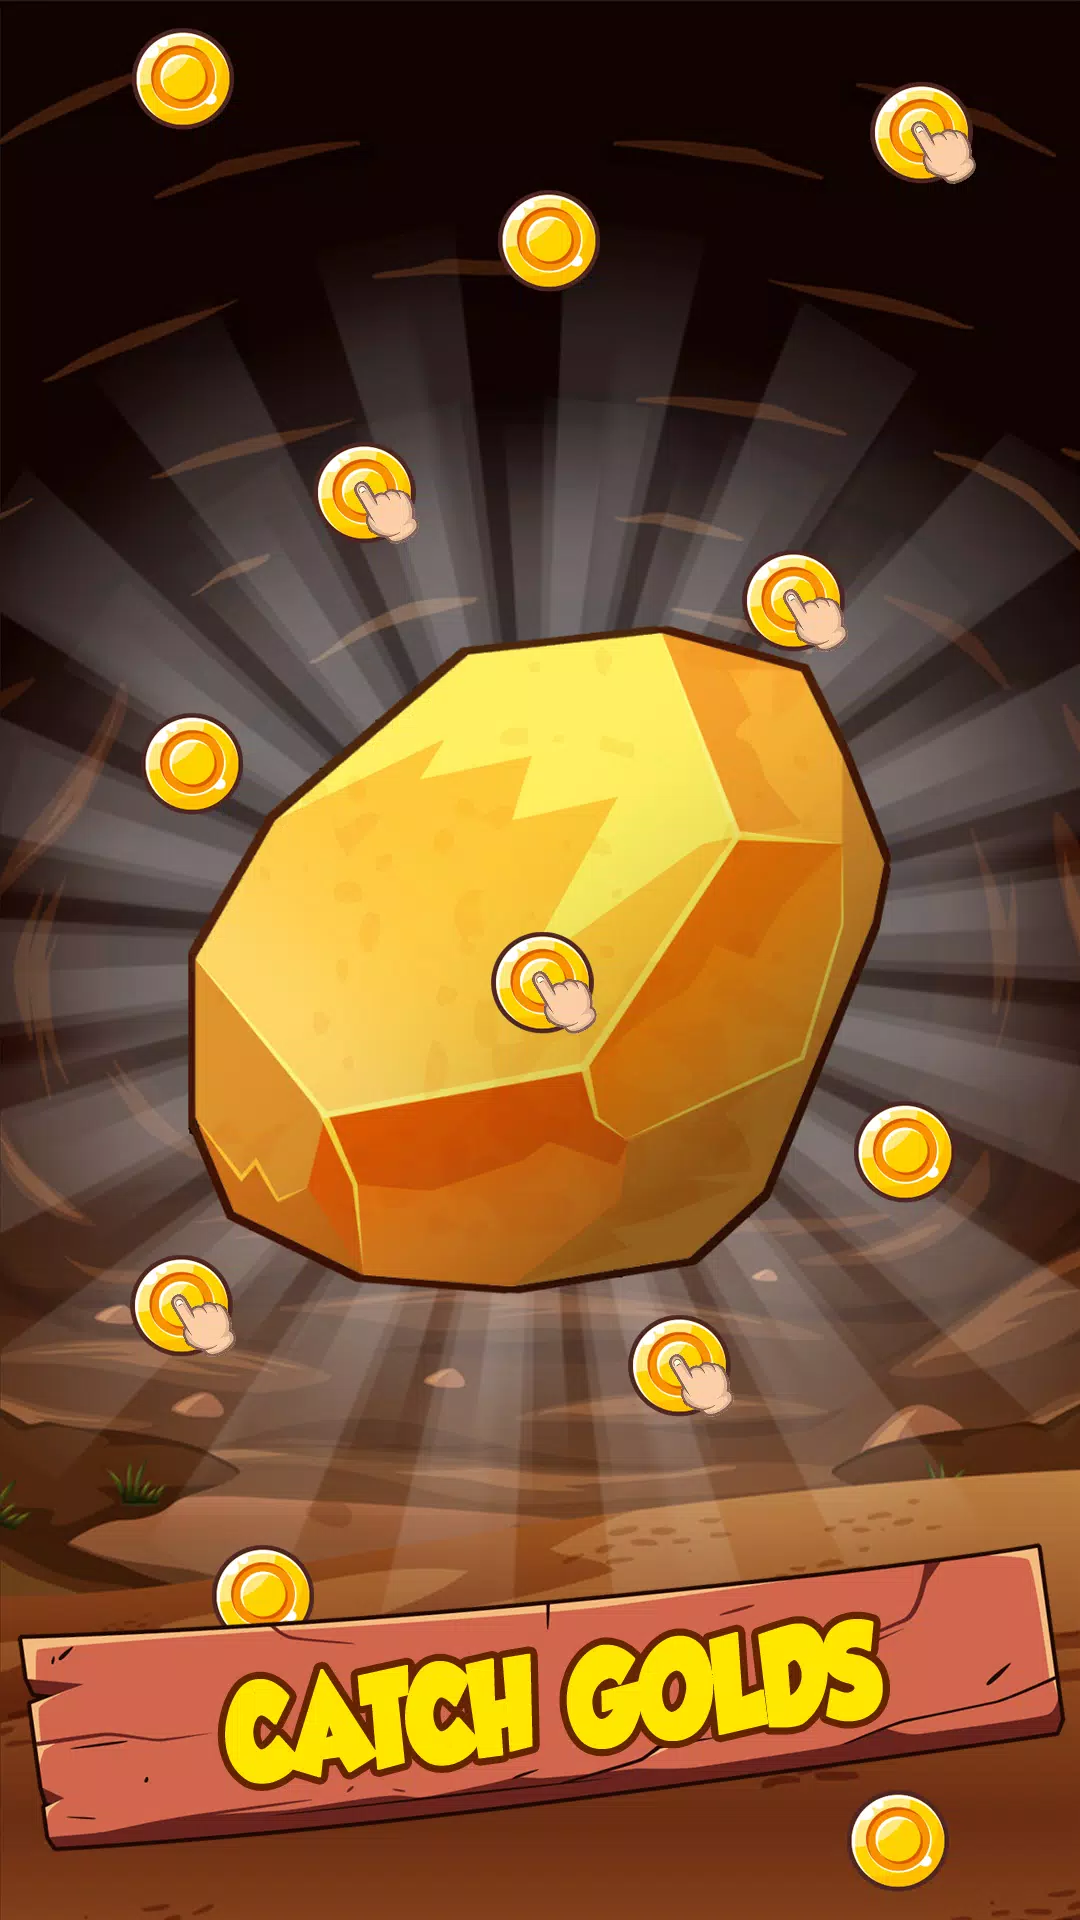 Mine Clicker: Gold mining simulator & Incremental games::Appstore  for Android